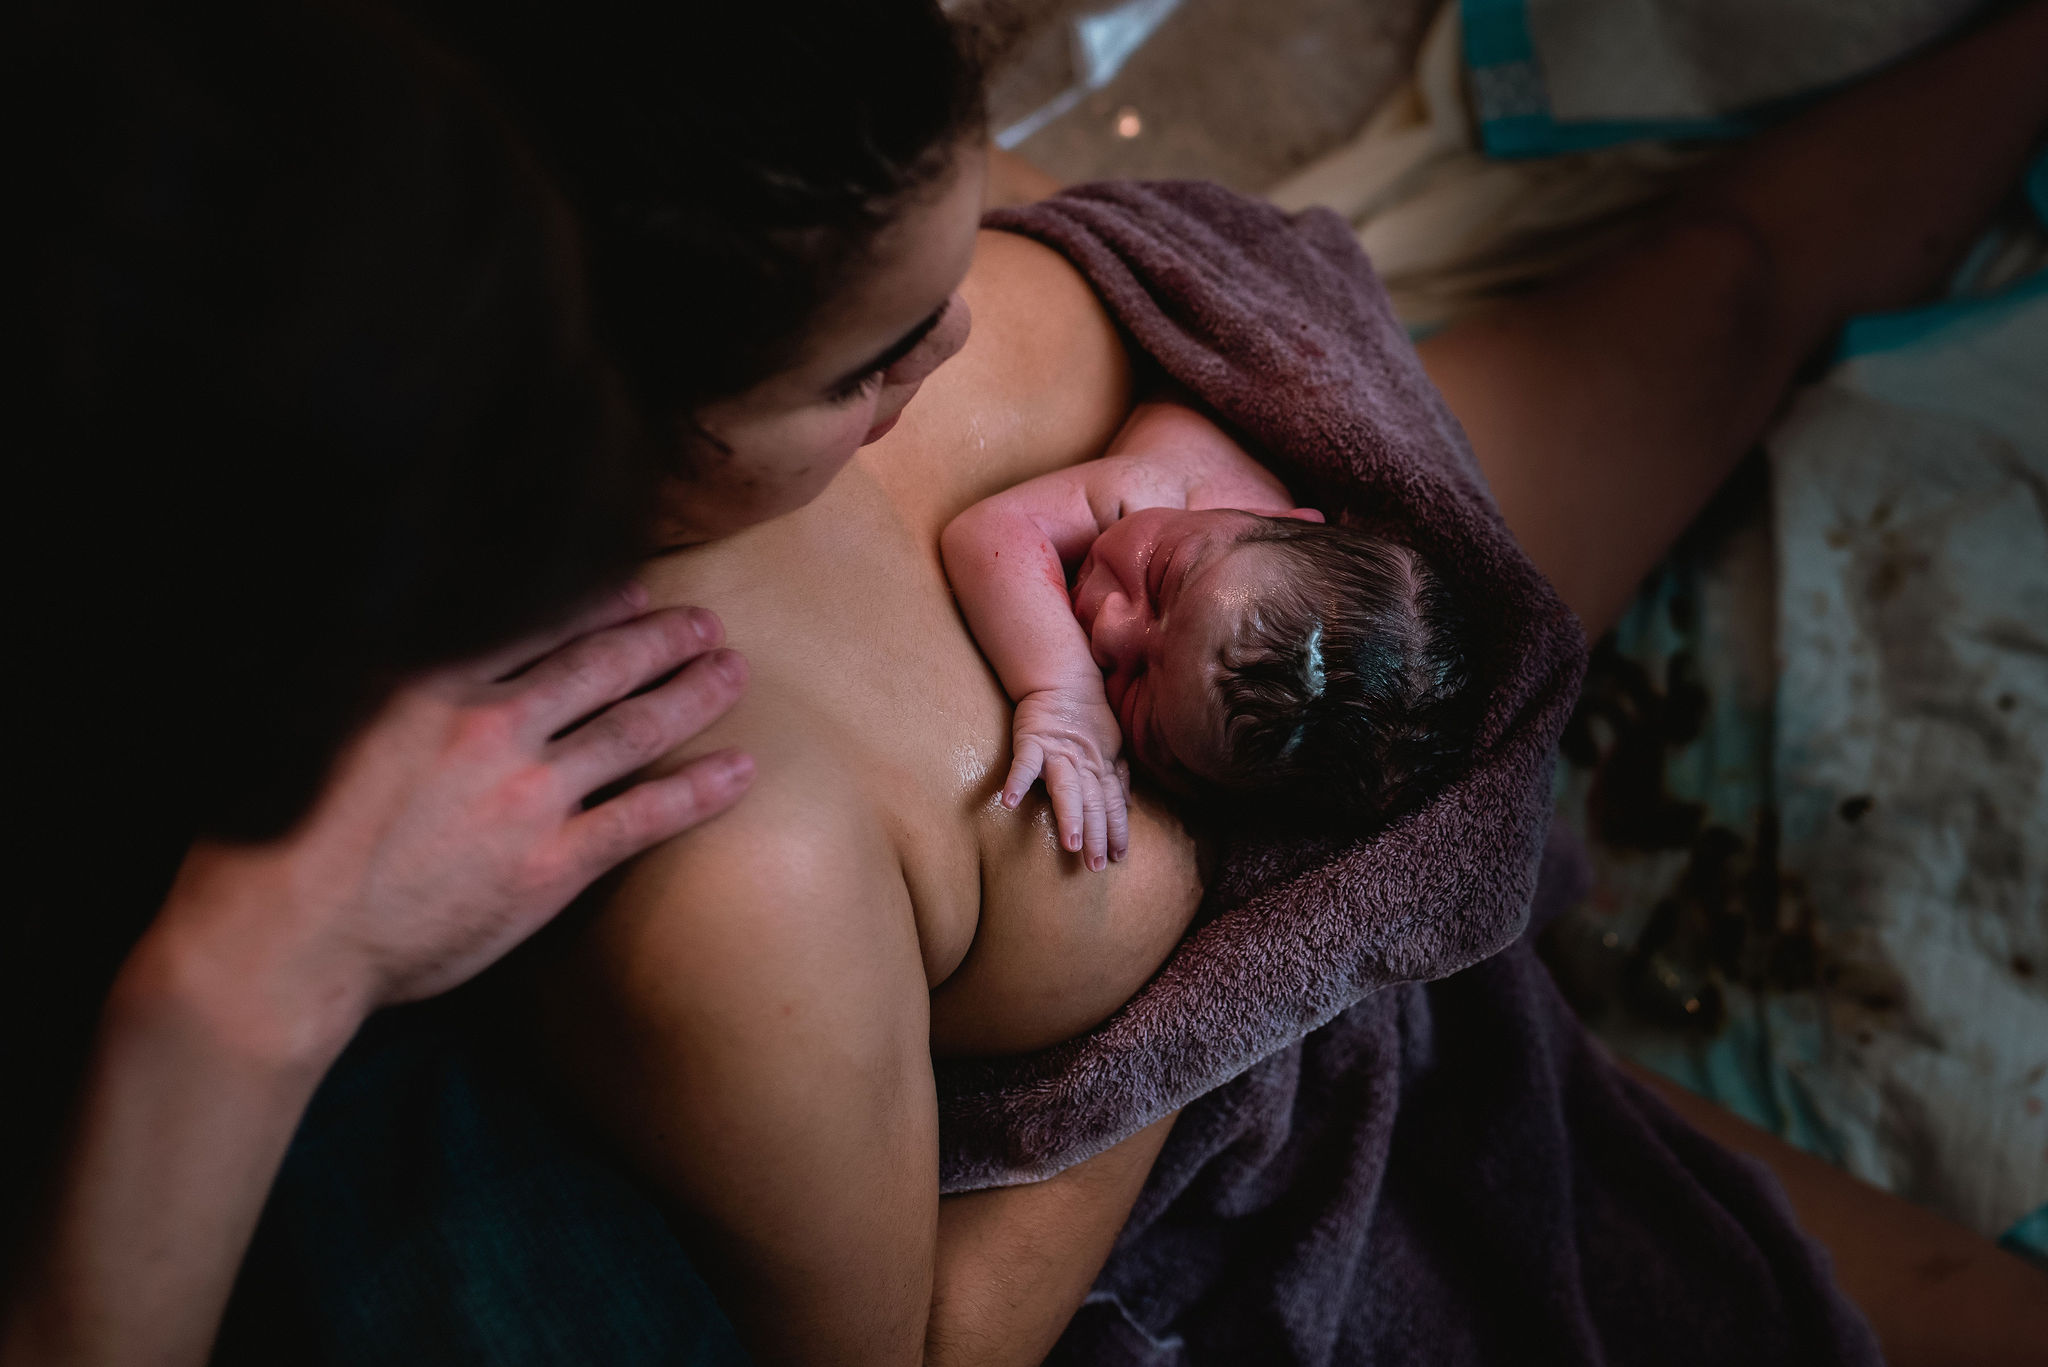 A new parent looks down at their newborn baby on their chest wrapped in a brown towel. There is a hand on the birthing person